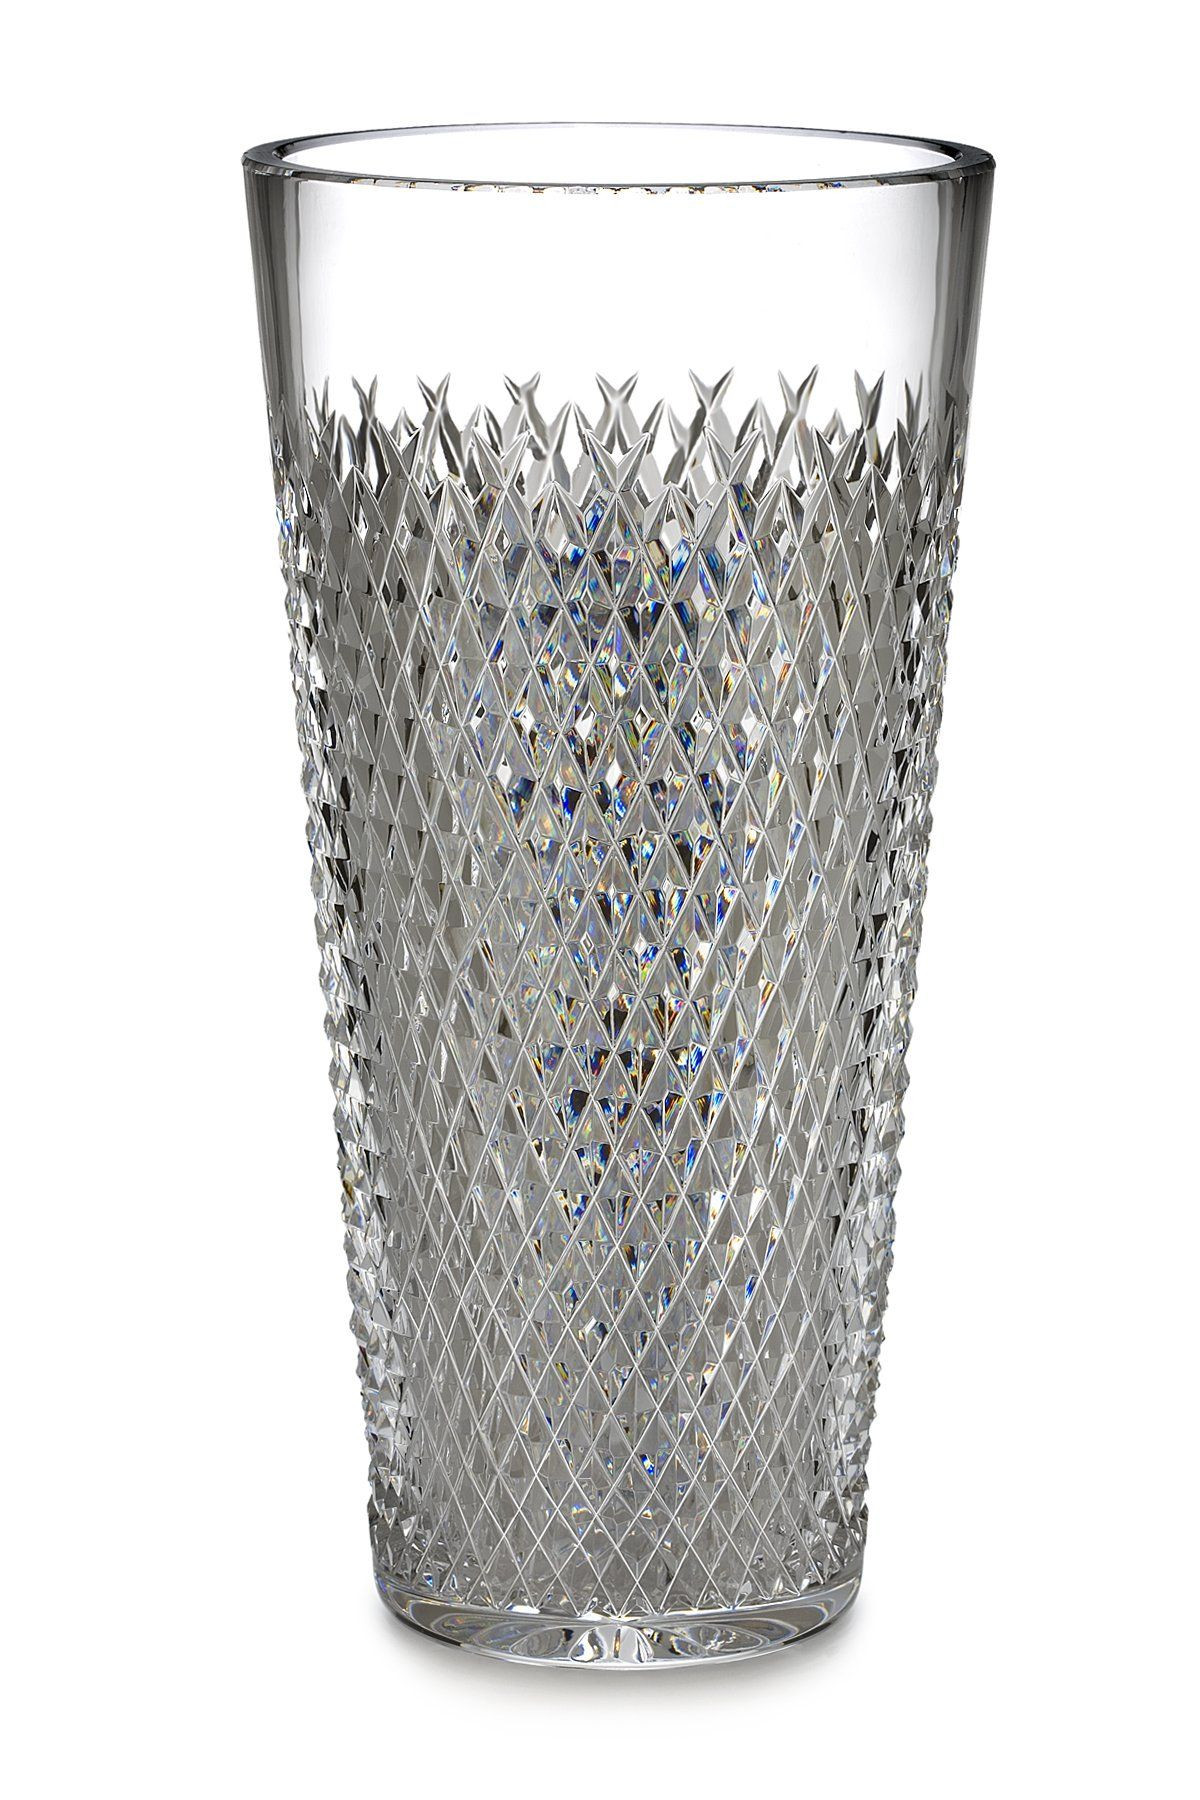 18 Fashionable Waterford 10 Inch Vase 2024 free download waterford 10 inch vase of waterford alana 12 inch vase 12 inch vase crystal alana vases within waterford alana 12 inch vase 12 inch vase crystal alana